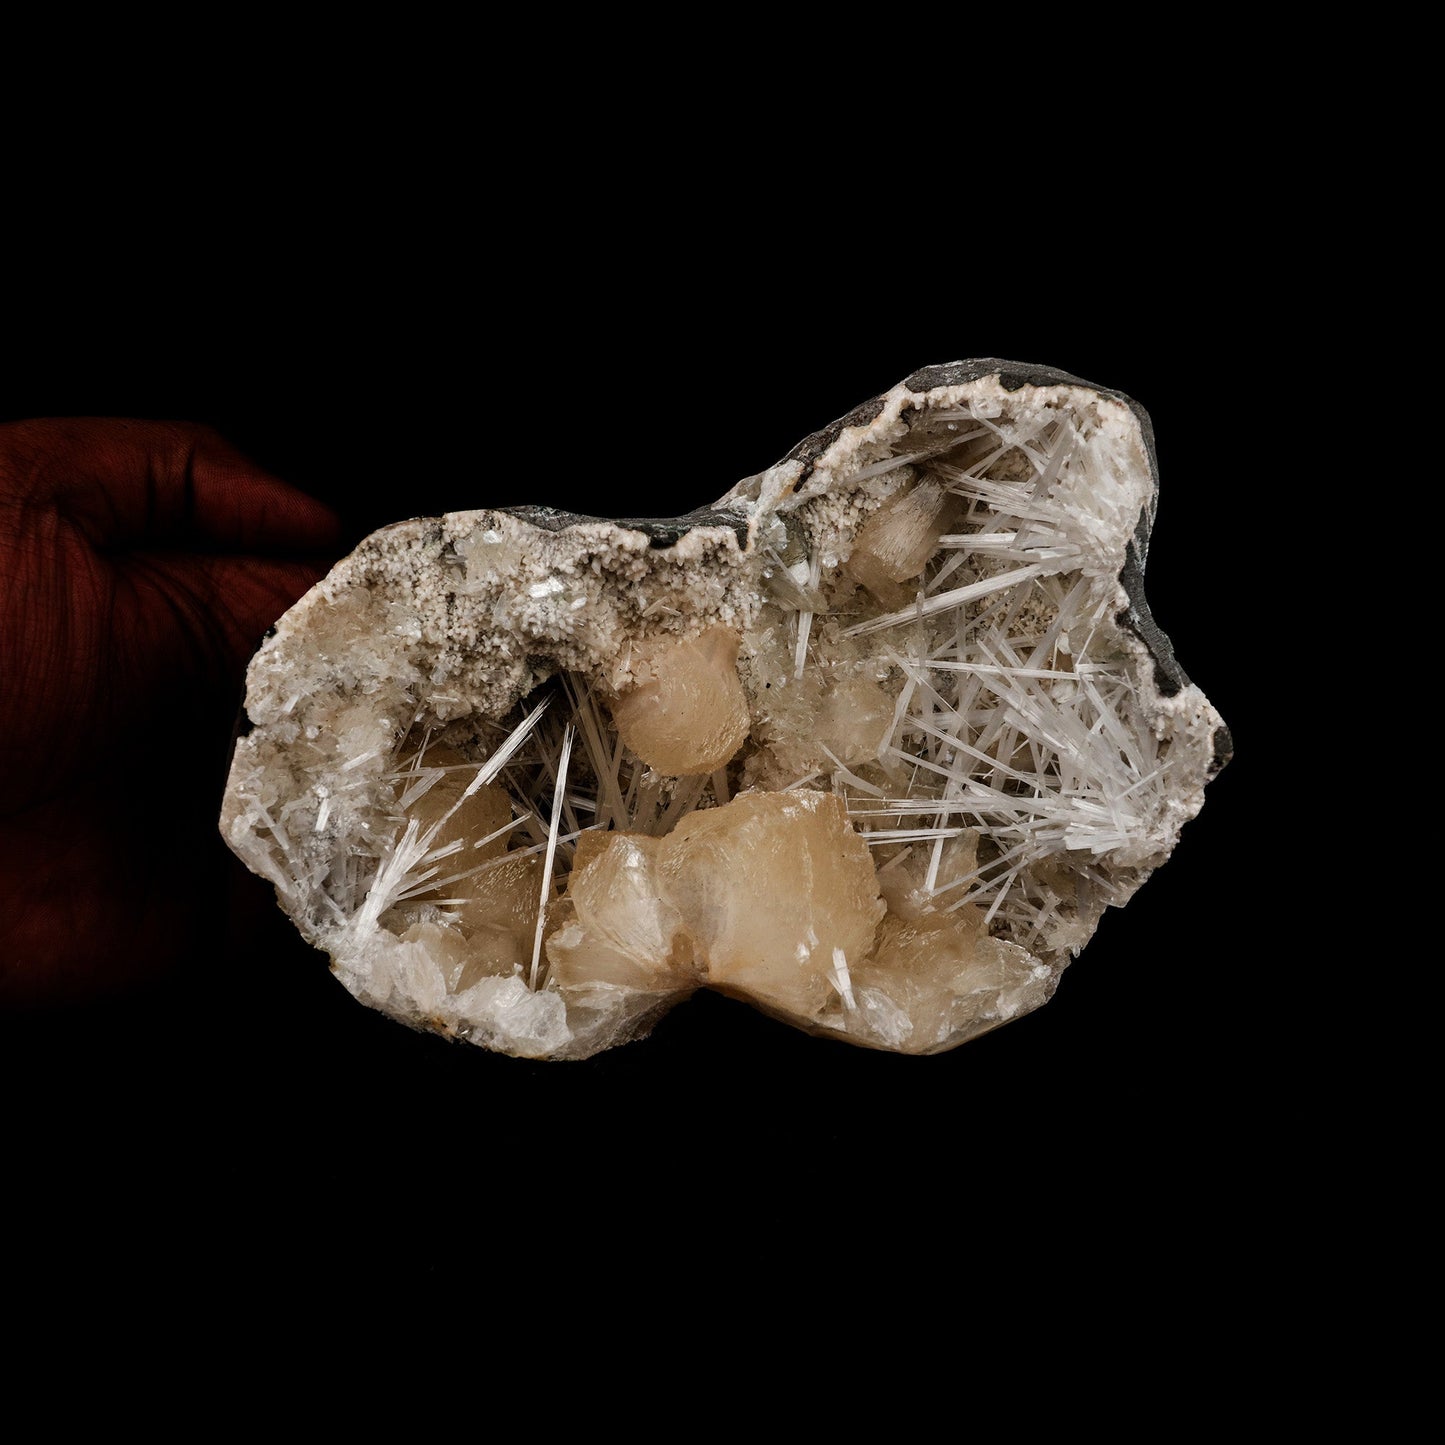 Stilbite Crystals with Scolecite on Heulandite Natural Mineral Specime…  https://www.superbminerals.us/products/stilbite-crystals-with-scolecite-on-heulandite-natural-mineral-specimen-b-5262  Features: Throughout a large geode, Scholecite crystals are interspersed with beige Heulandite crystals. Scolecite crystal sprays are glossy, colourless, highly translucent, and needle-like in shape. Each crystal creation is like a work of art itself. Primary Mineral(s): Stilbite Secondary Mineral(s): Scolecite